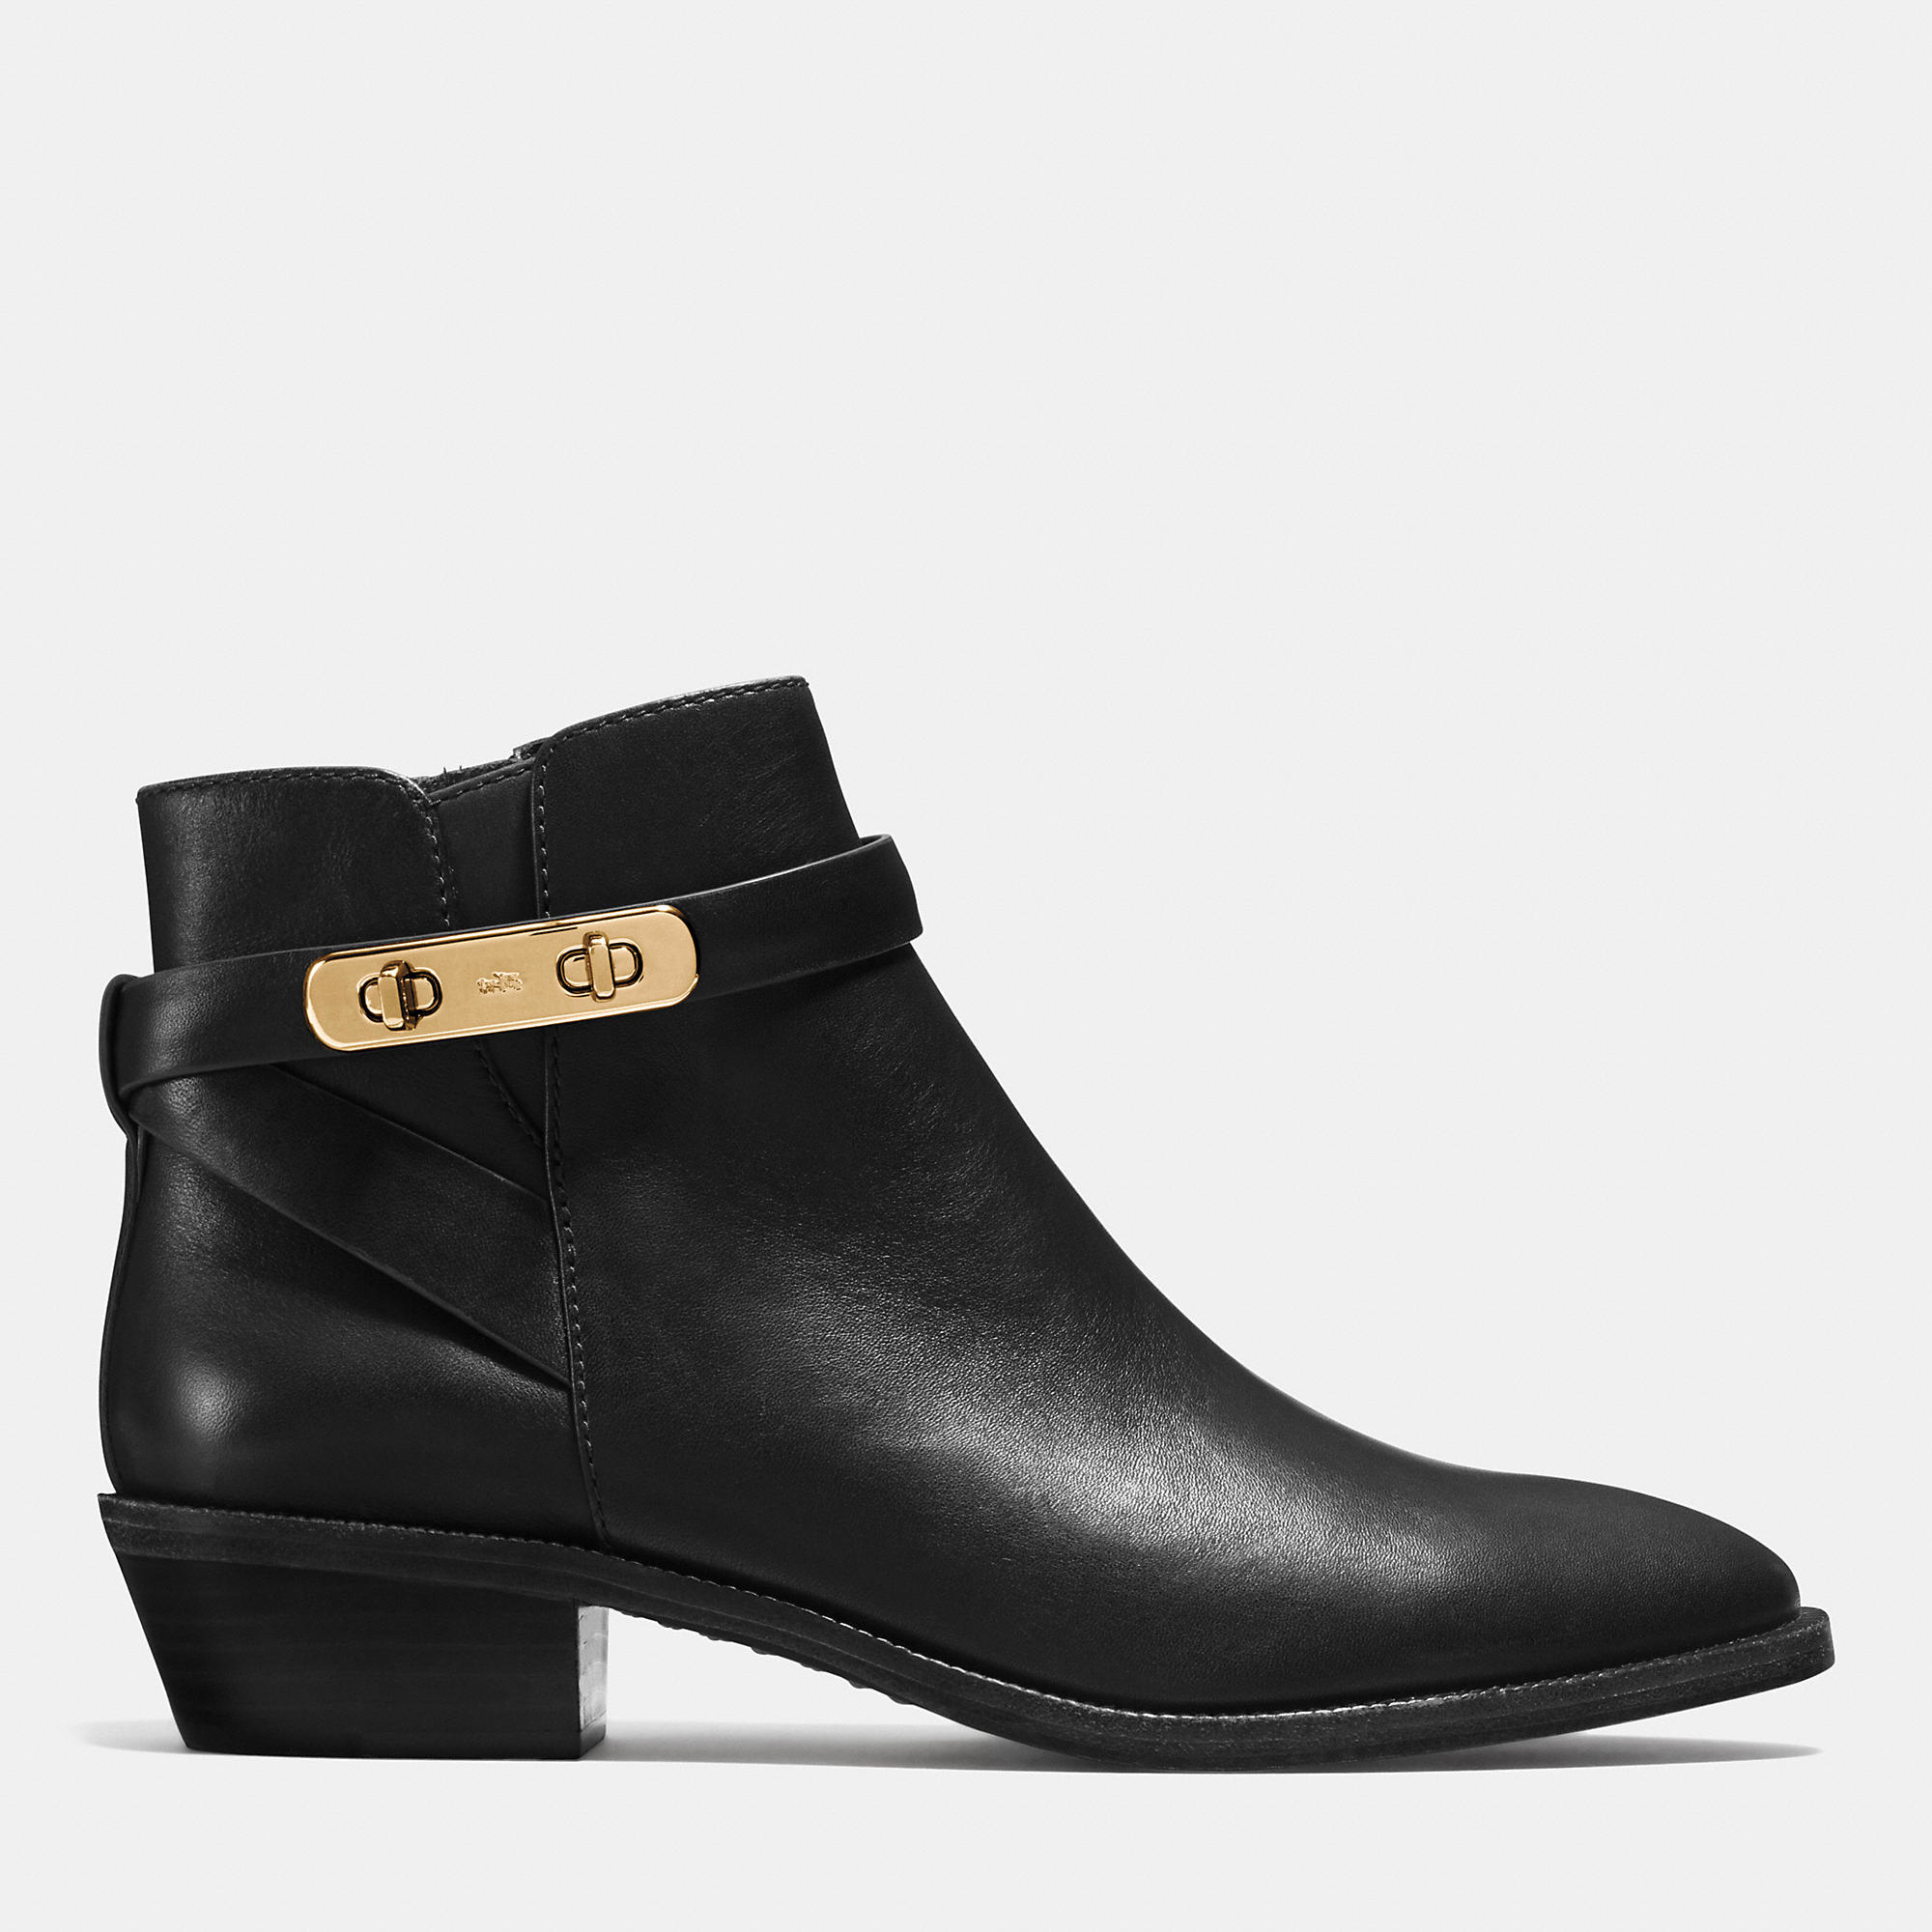 COACH Leather Coleen Bootie in Black - Lyst